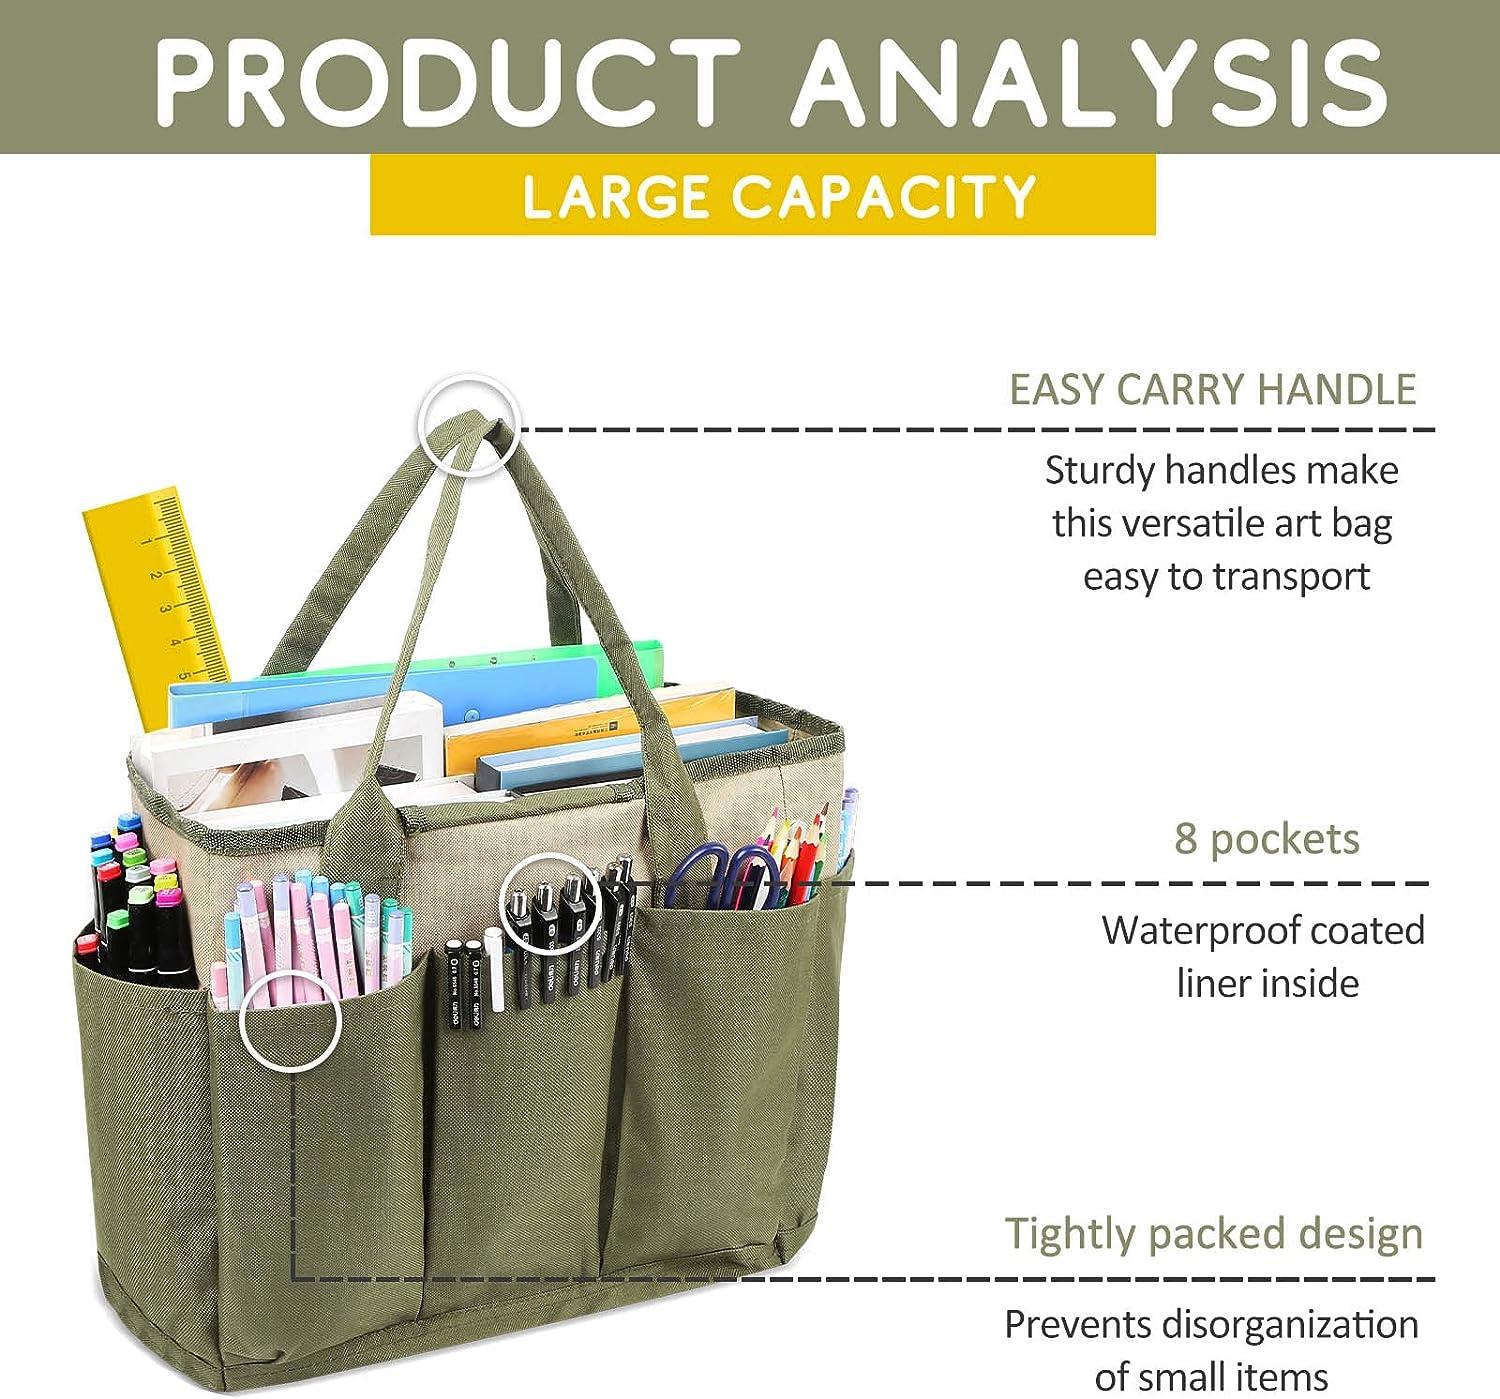 Sewing and Craft Supplies Storage Tote, Large Capacity Travel